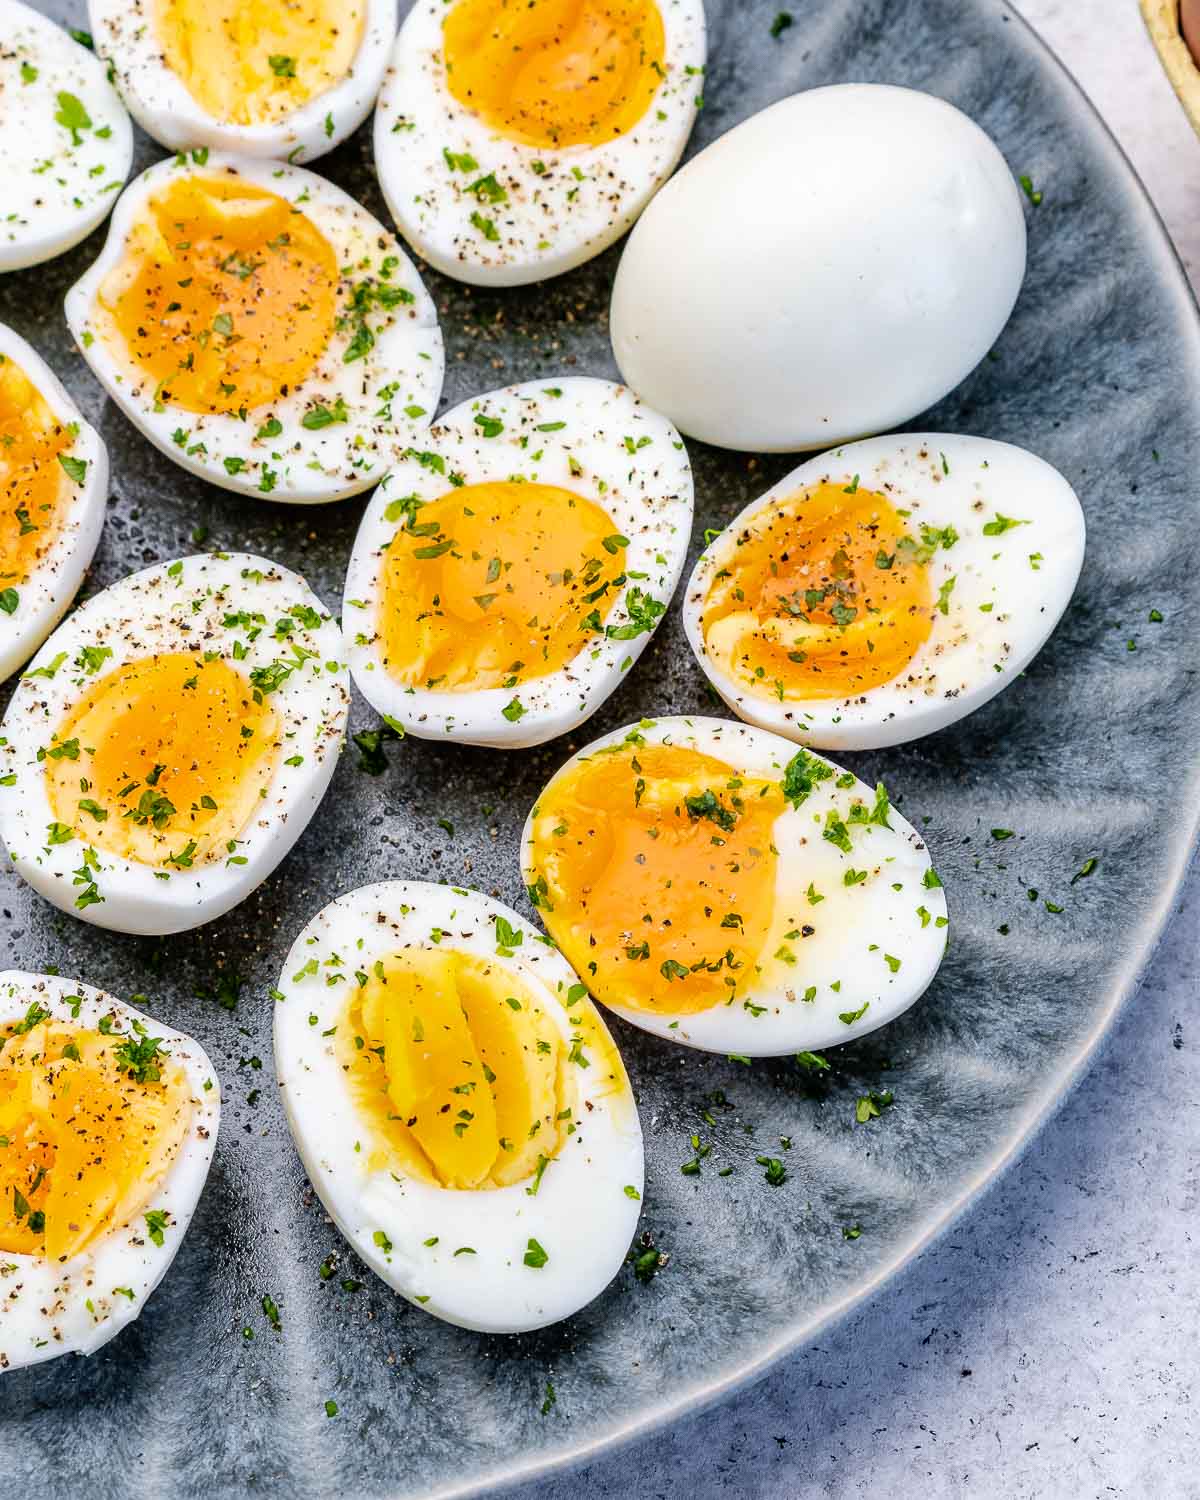 How to make Perfect Hard Boiled Eggs - House of Nash Eats